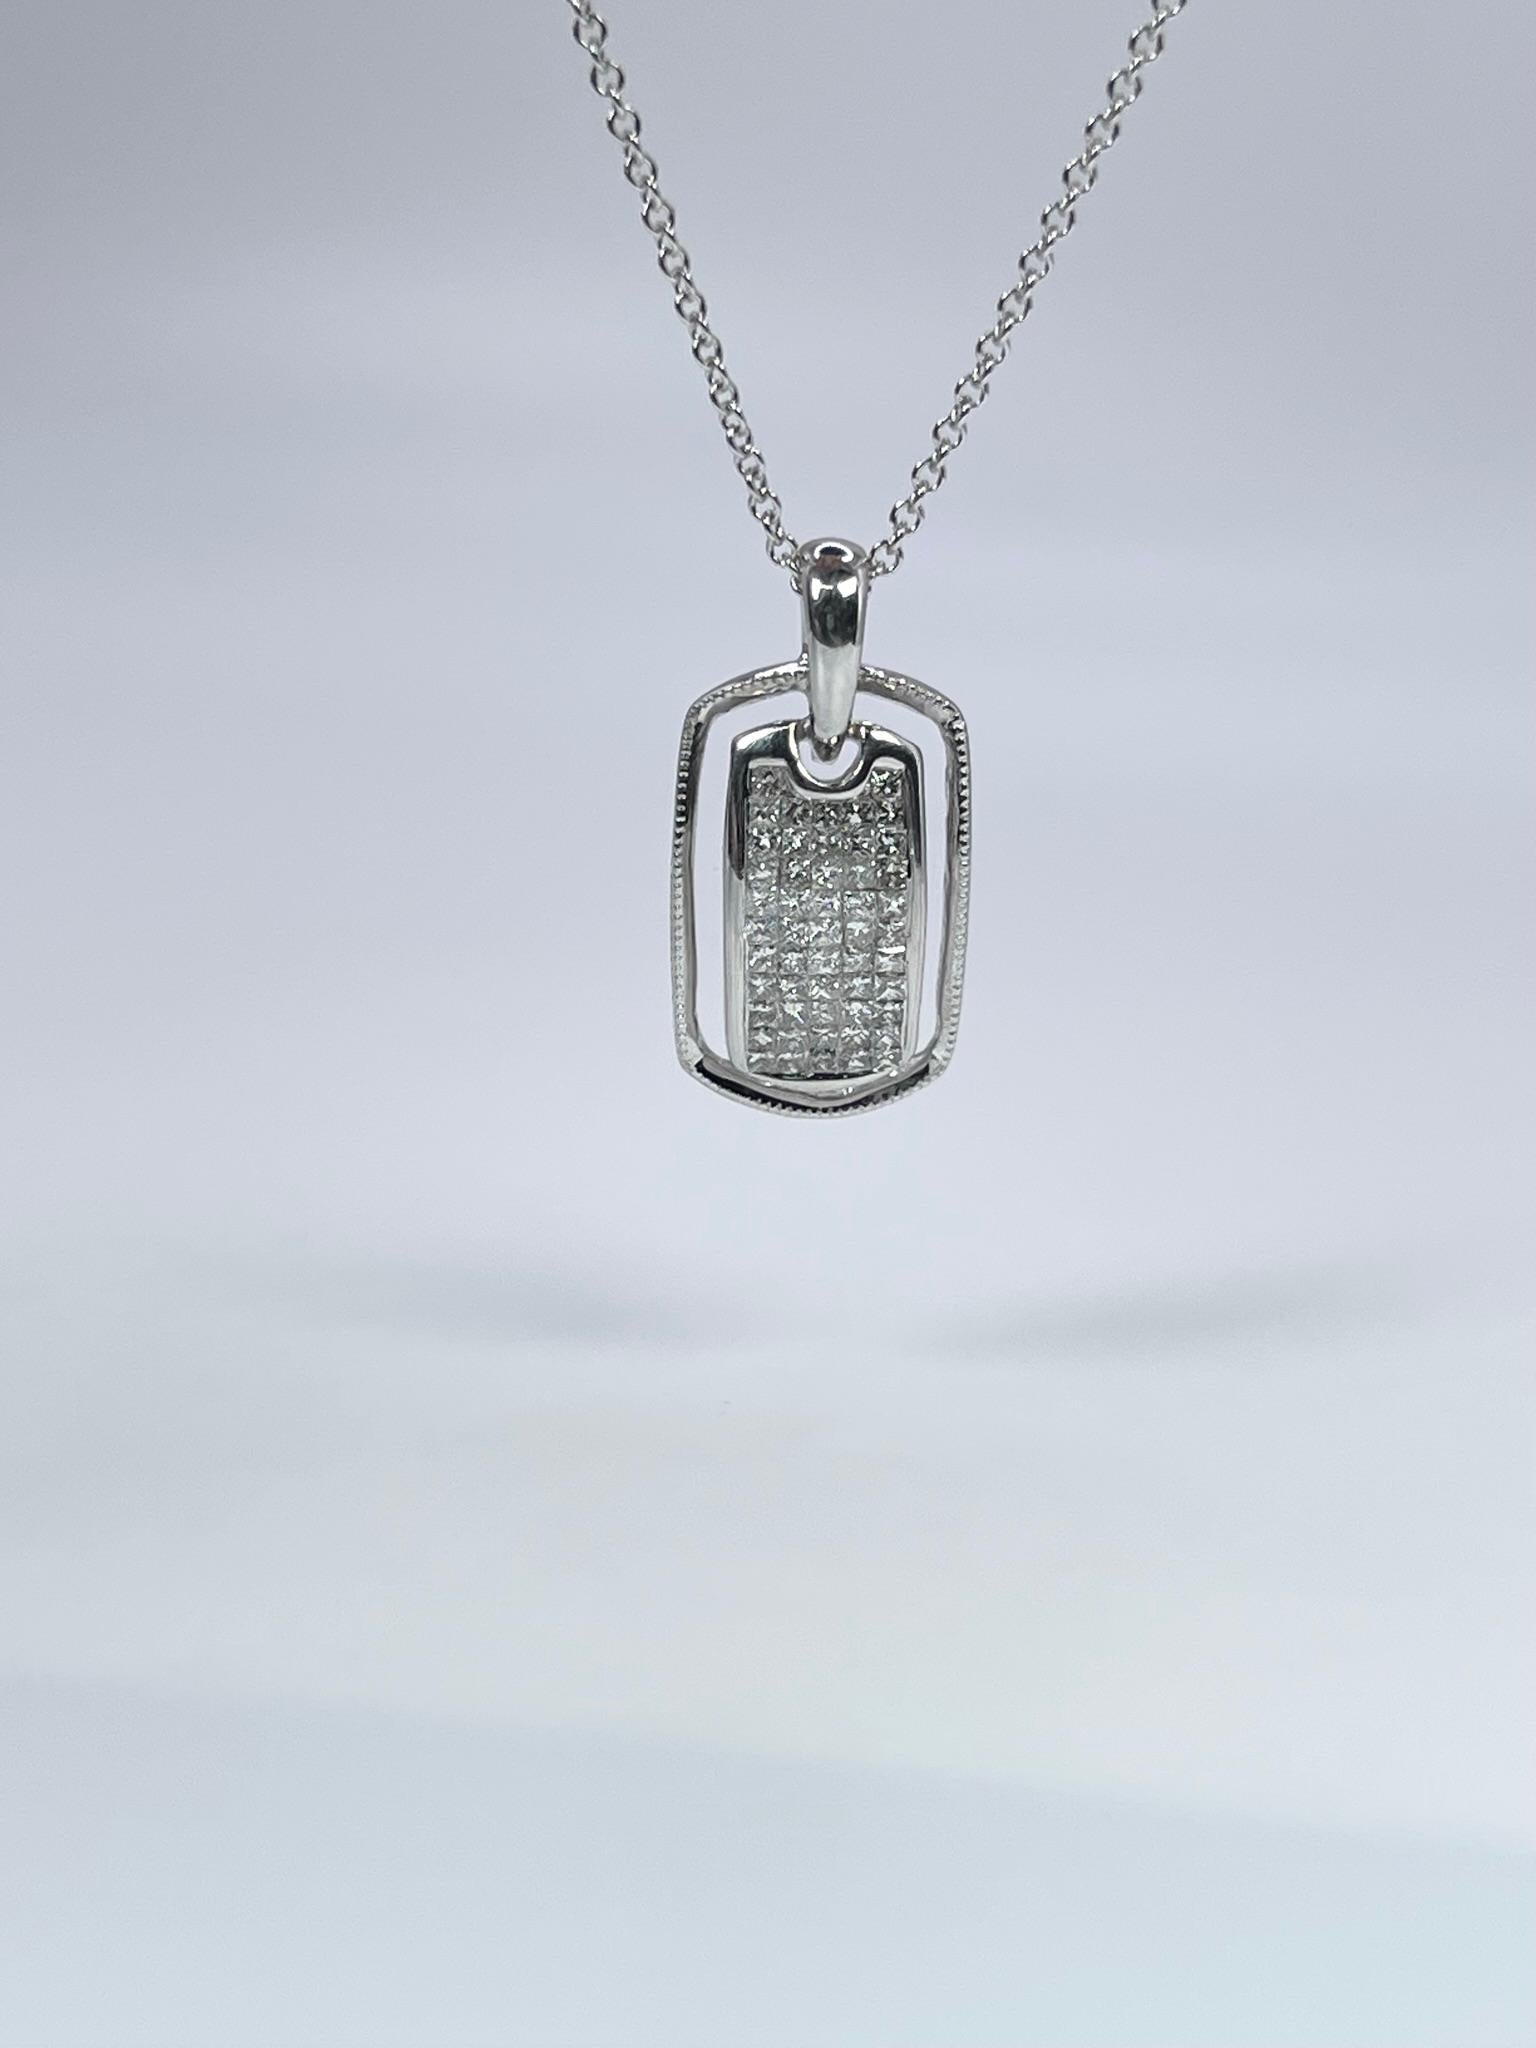 Rectangular pendant made with diamonds in a unique invisible setting style, the pendant is set so that there is no gold all you see are diamonds. The metal is 18KT white gold. The pendant is unisex.

GRAM WEIGHT: 2.98gr
GOLD: 18KT white